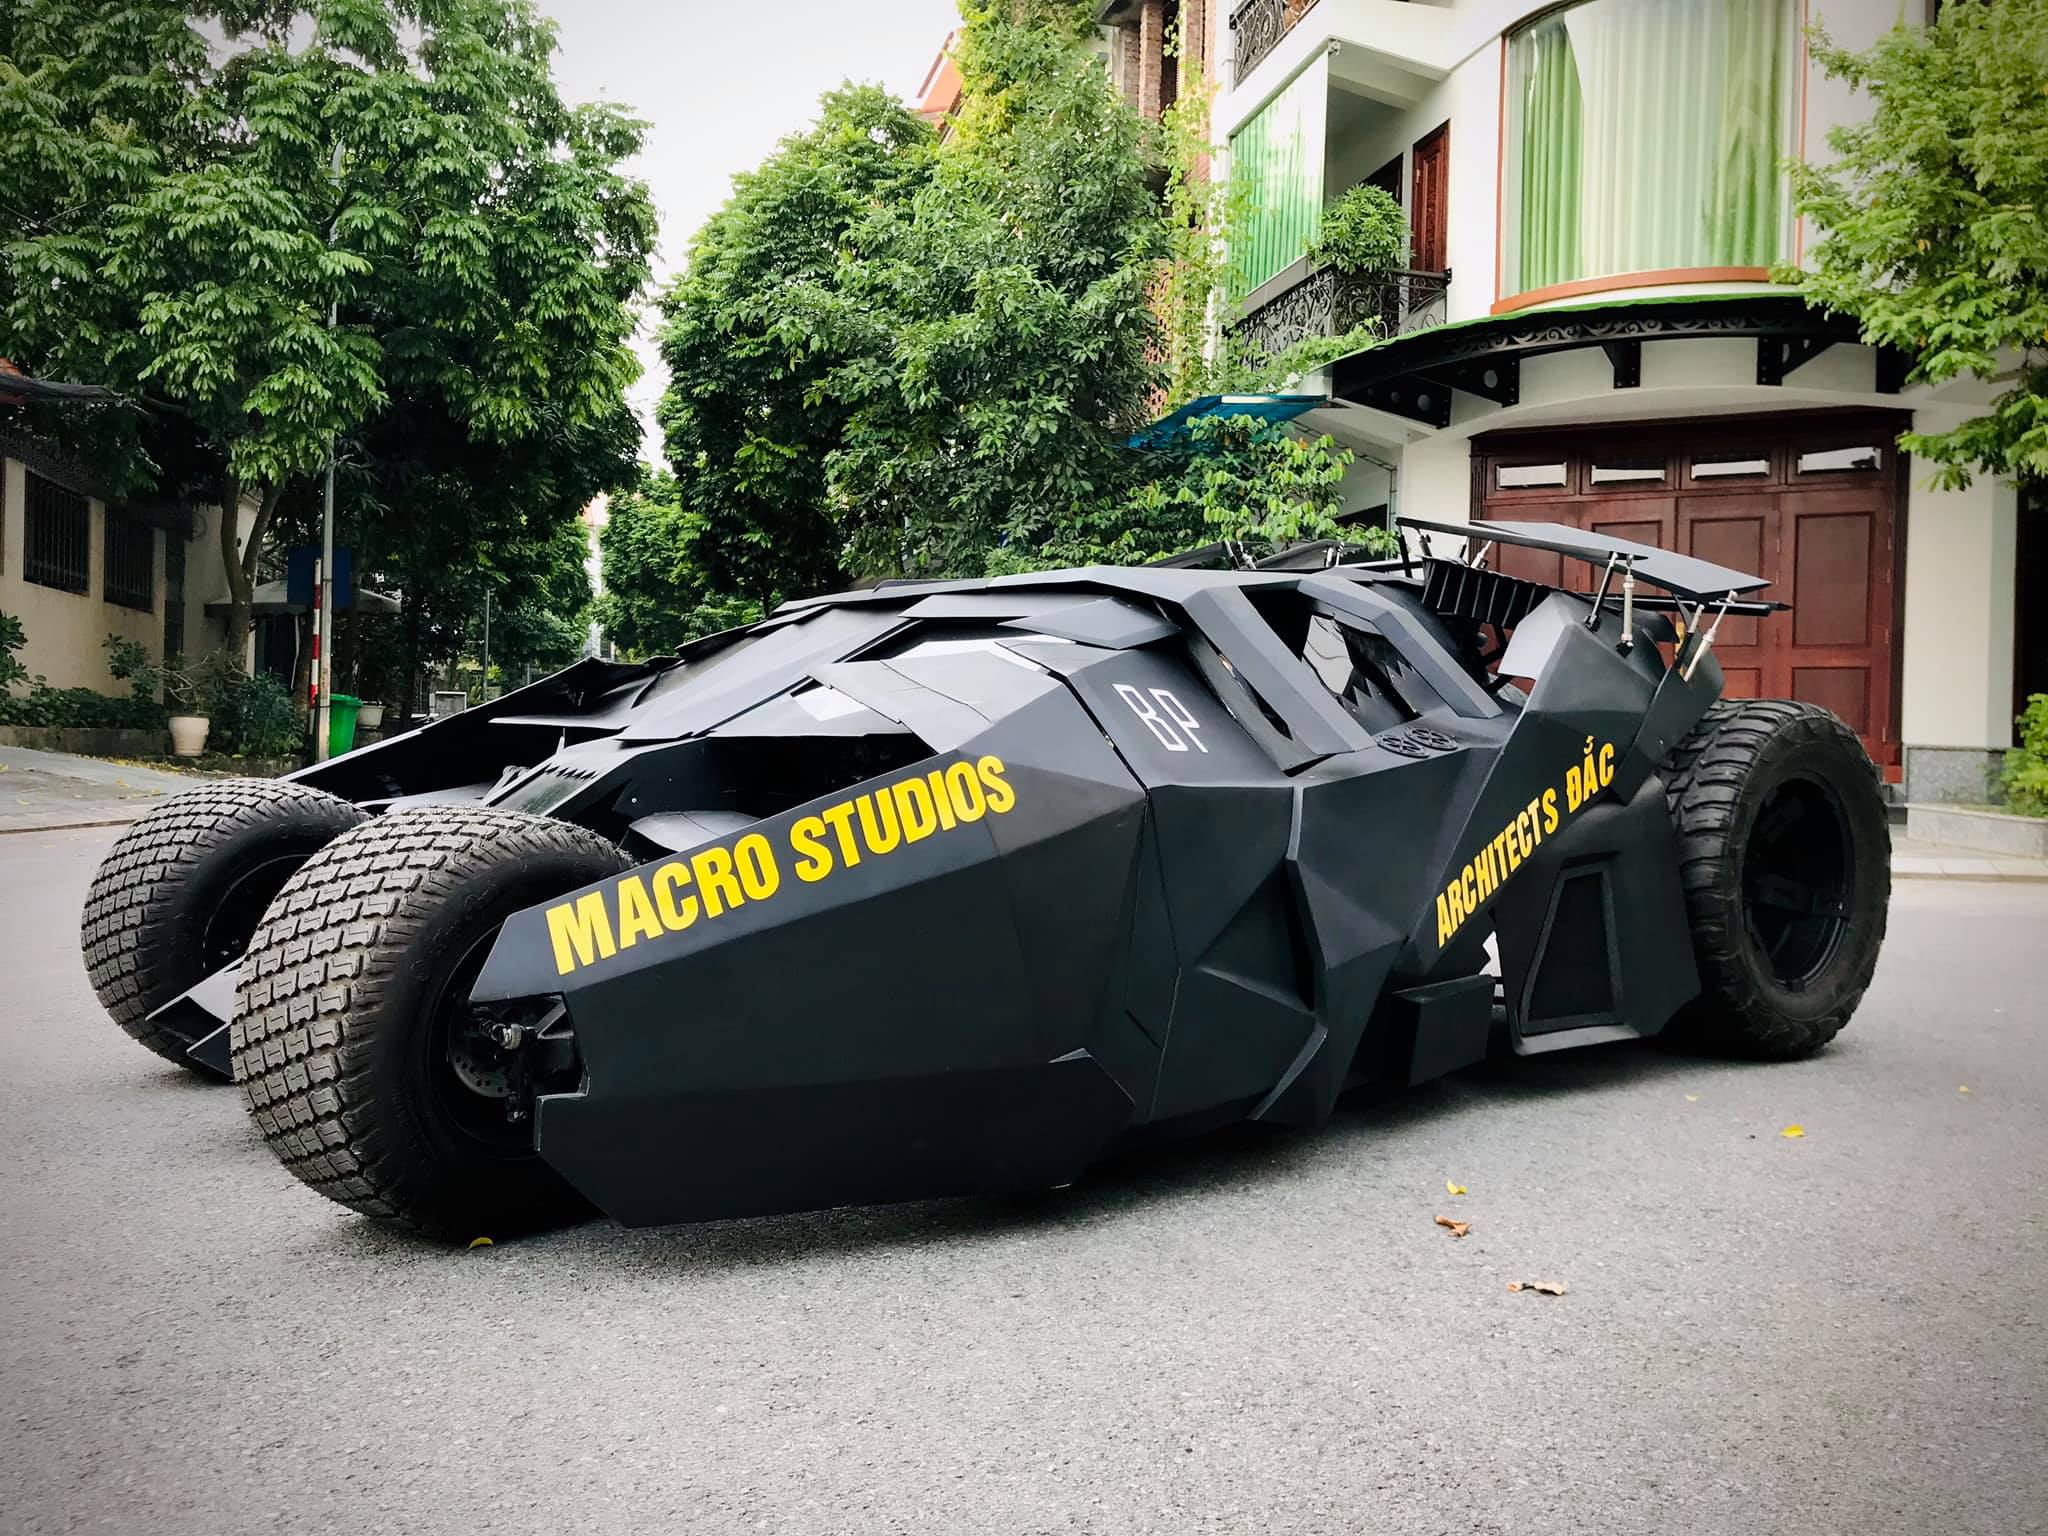 The Dark Knight Goes Green With This Electric Batmobile Tumbler Replica